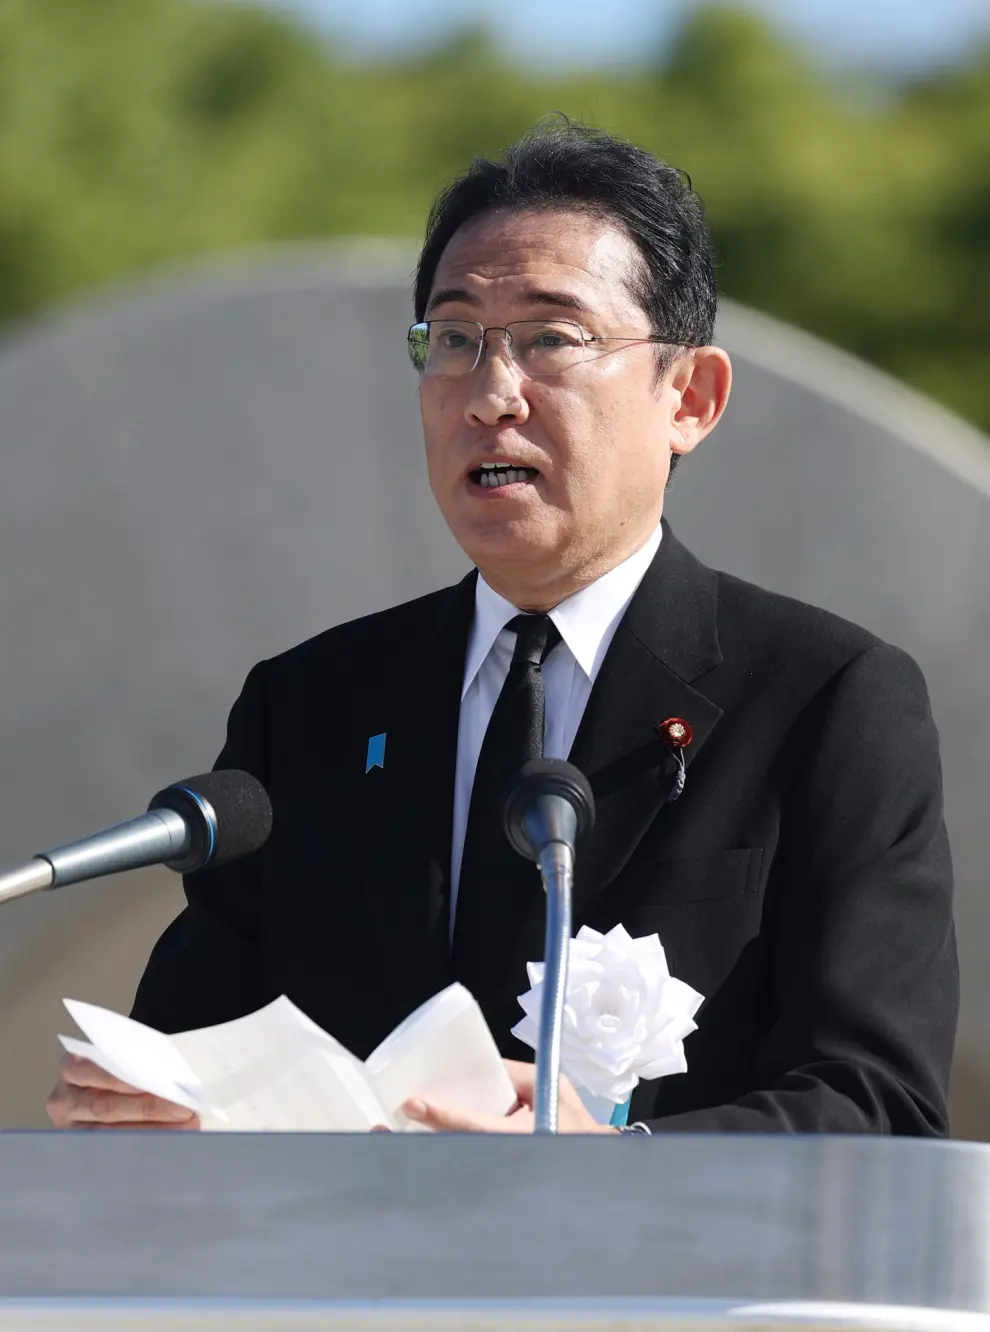 Hiroshima (Japan), 05/08/2023.- Japanese Prime Minister Fumio Kishida delivers a speech during the memorial service for victims of the atomic bombing of Hiroshima at Hiroshima Peace Memorial Park in Hiroshima, Hiroshima Prefecture, western Japan, 06 August 2023, marking the 78th anniversary of the atomic bombing. Hiroshima City has announced the toll of victims from the atomic bombing rose to about 140,000. The number of victims was counted as the end of 1945 after the August 6 bombing. (Japón) EFE/EPA/JIJI PRESS JAPAN OUT EDITORIAL USE ONLY
